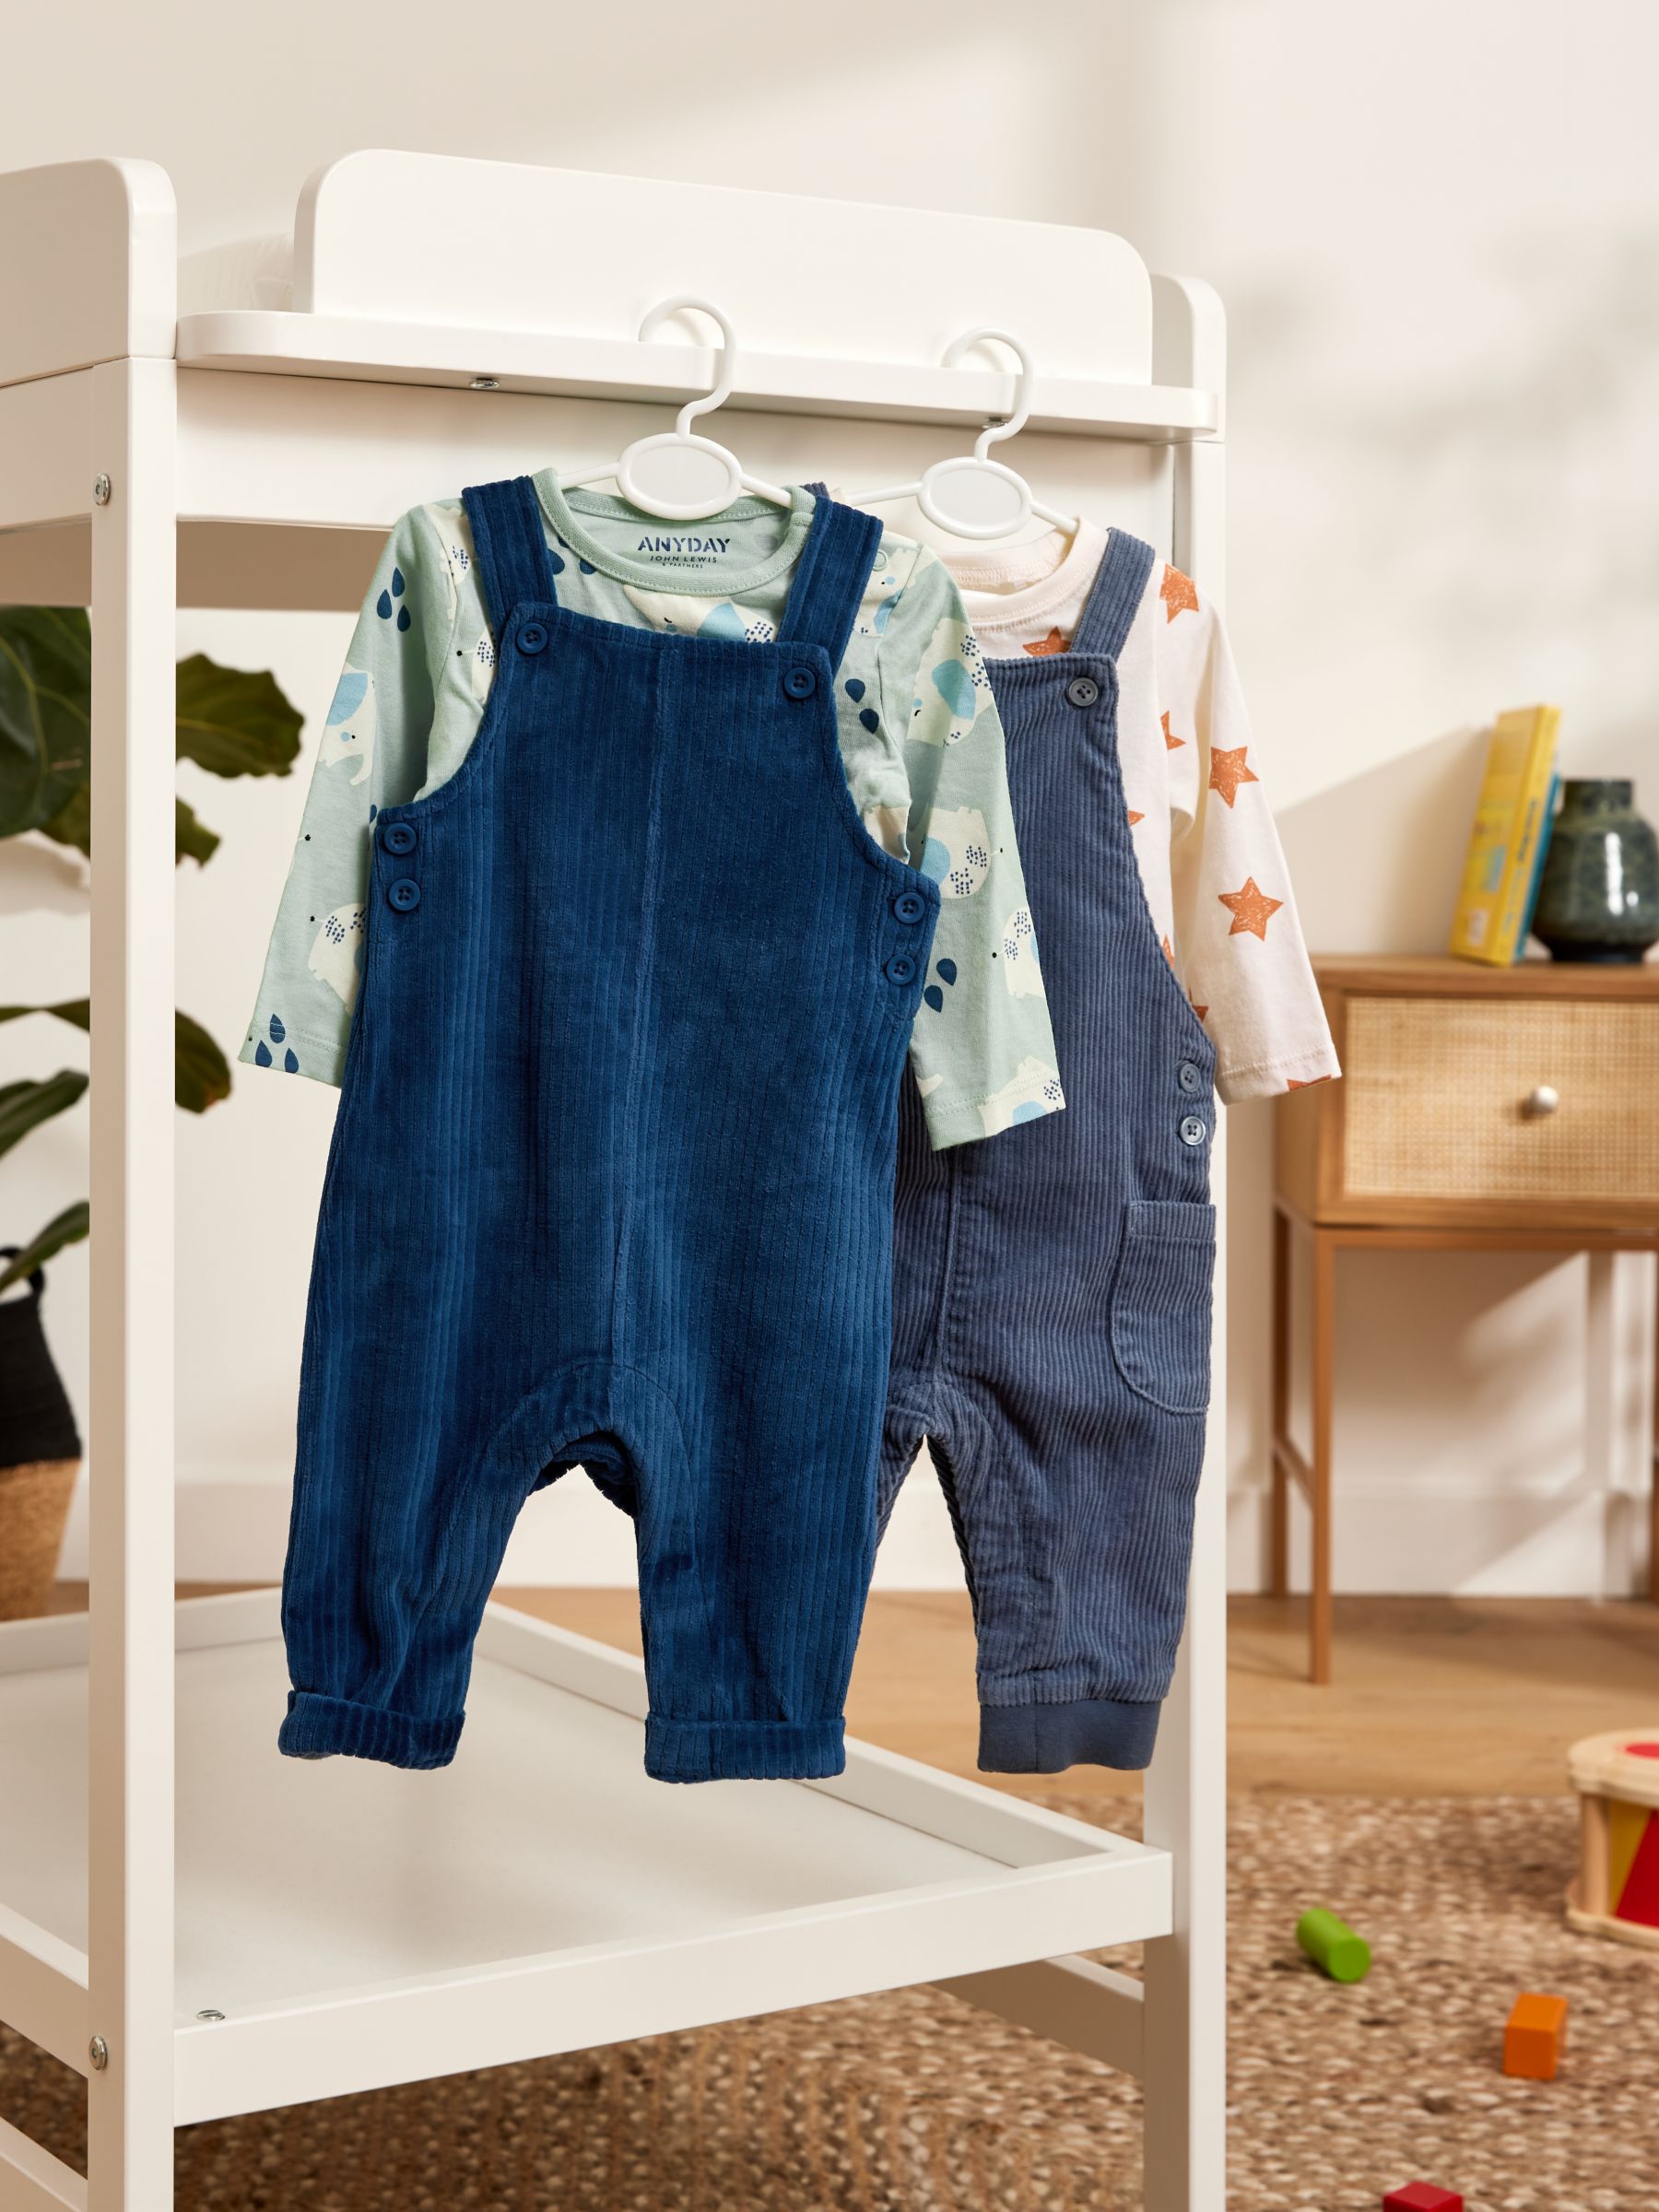 ANYDAY John Lewis & Partners Baby Elephant Top & Cord Dungarees Set, Multi, 9-12 months